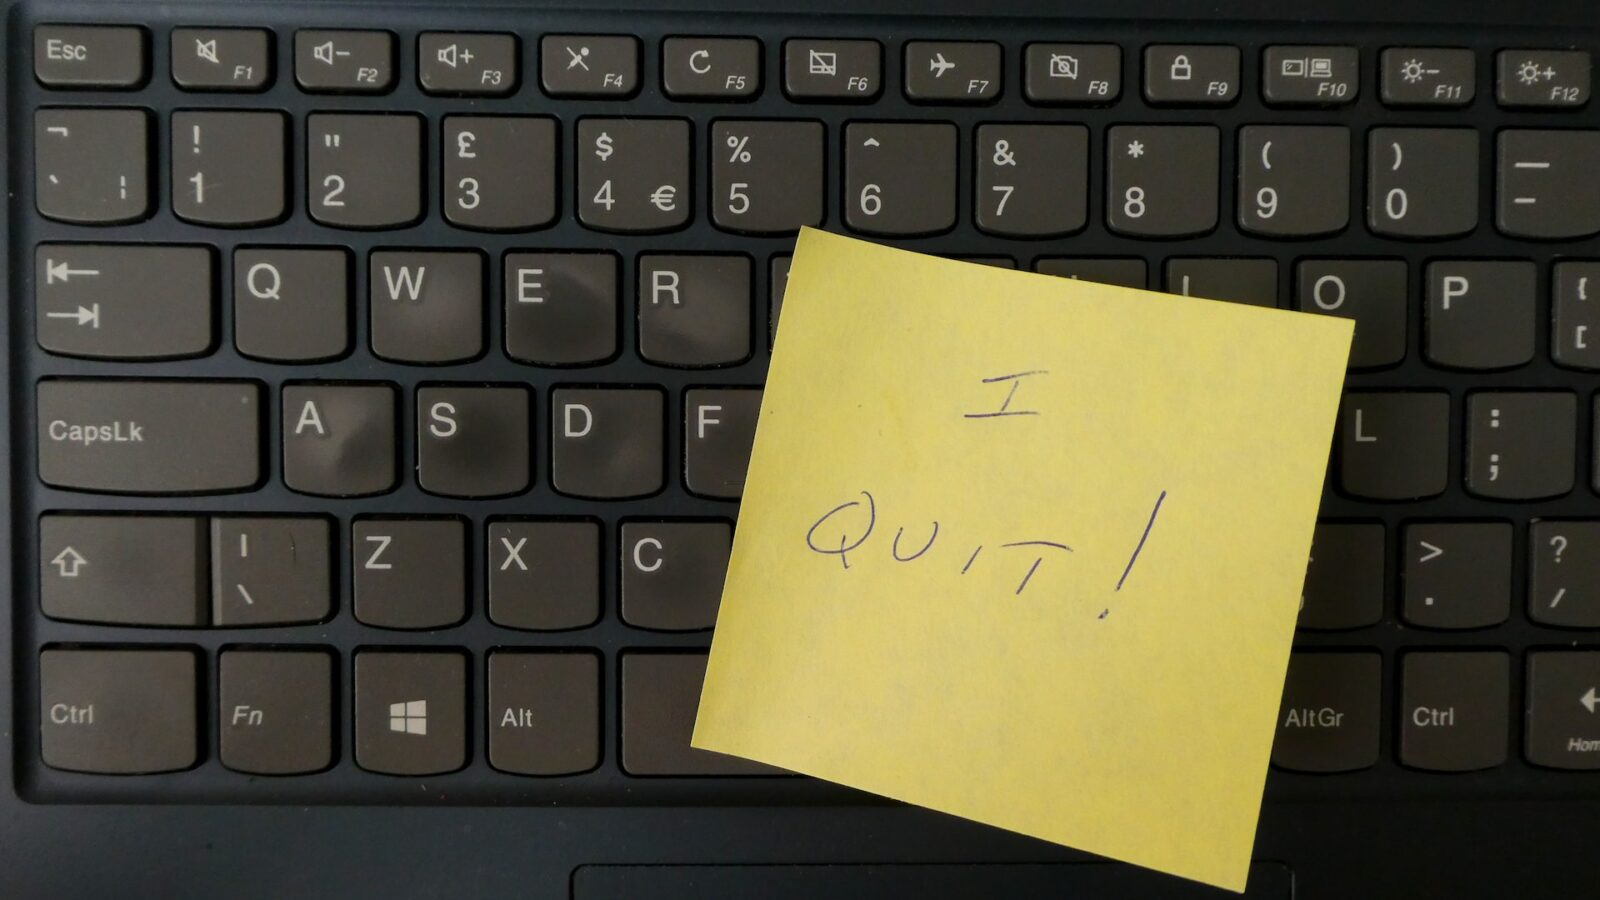 sticky note on keyboard stating "I Quit" showing resignation from job